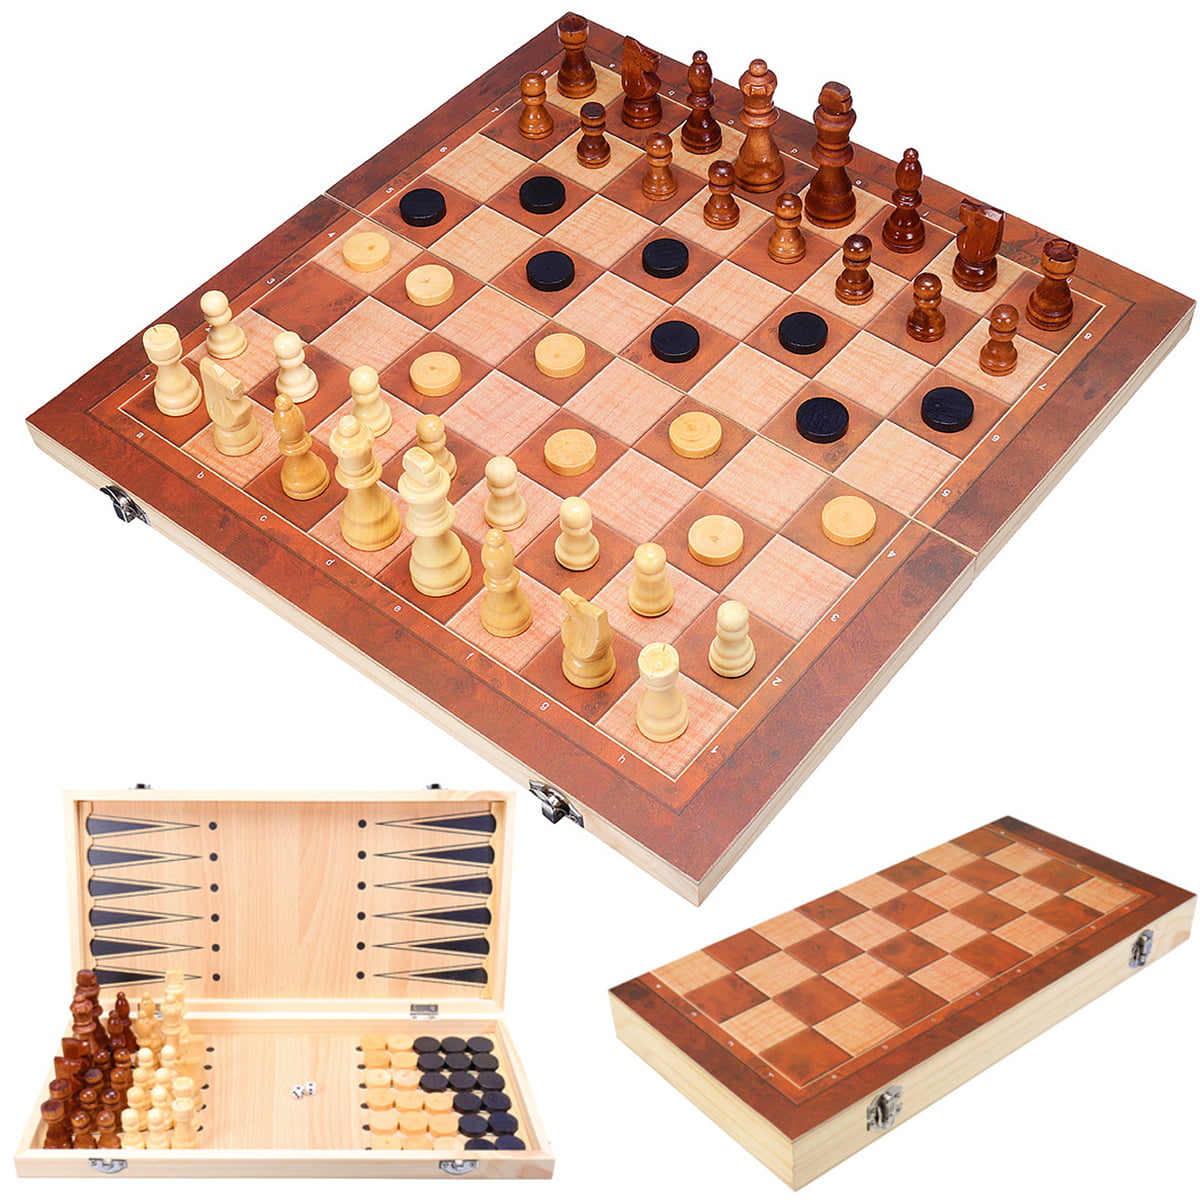 3in1 Large FOLDING WOODEN CHESS SECT  Board Game Checkers Backgammon Draught SE